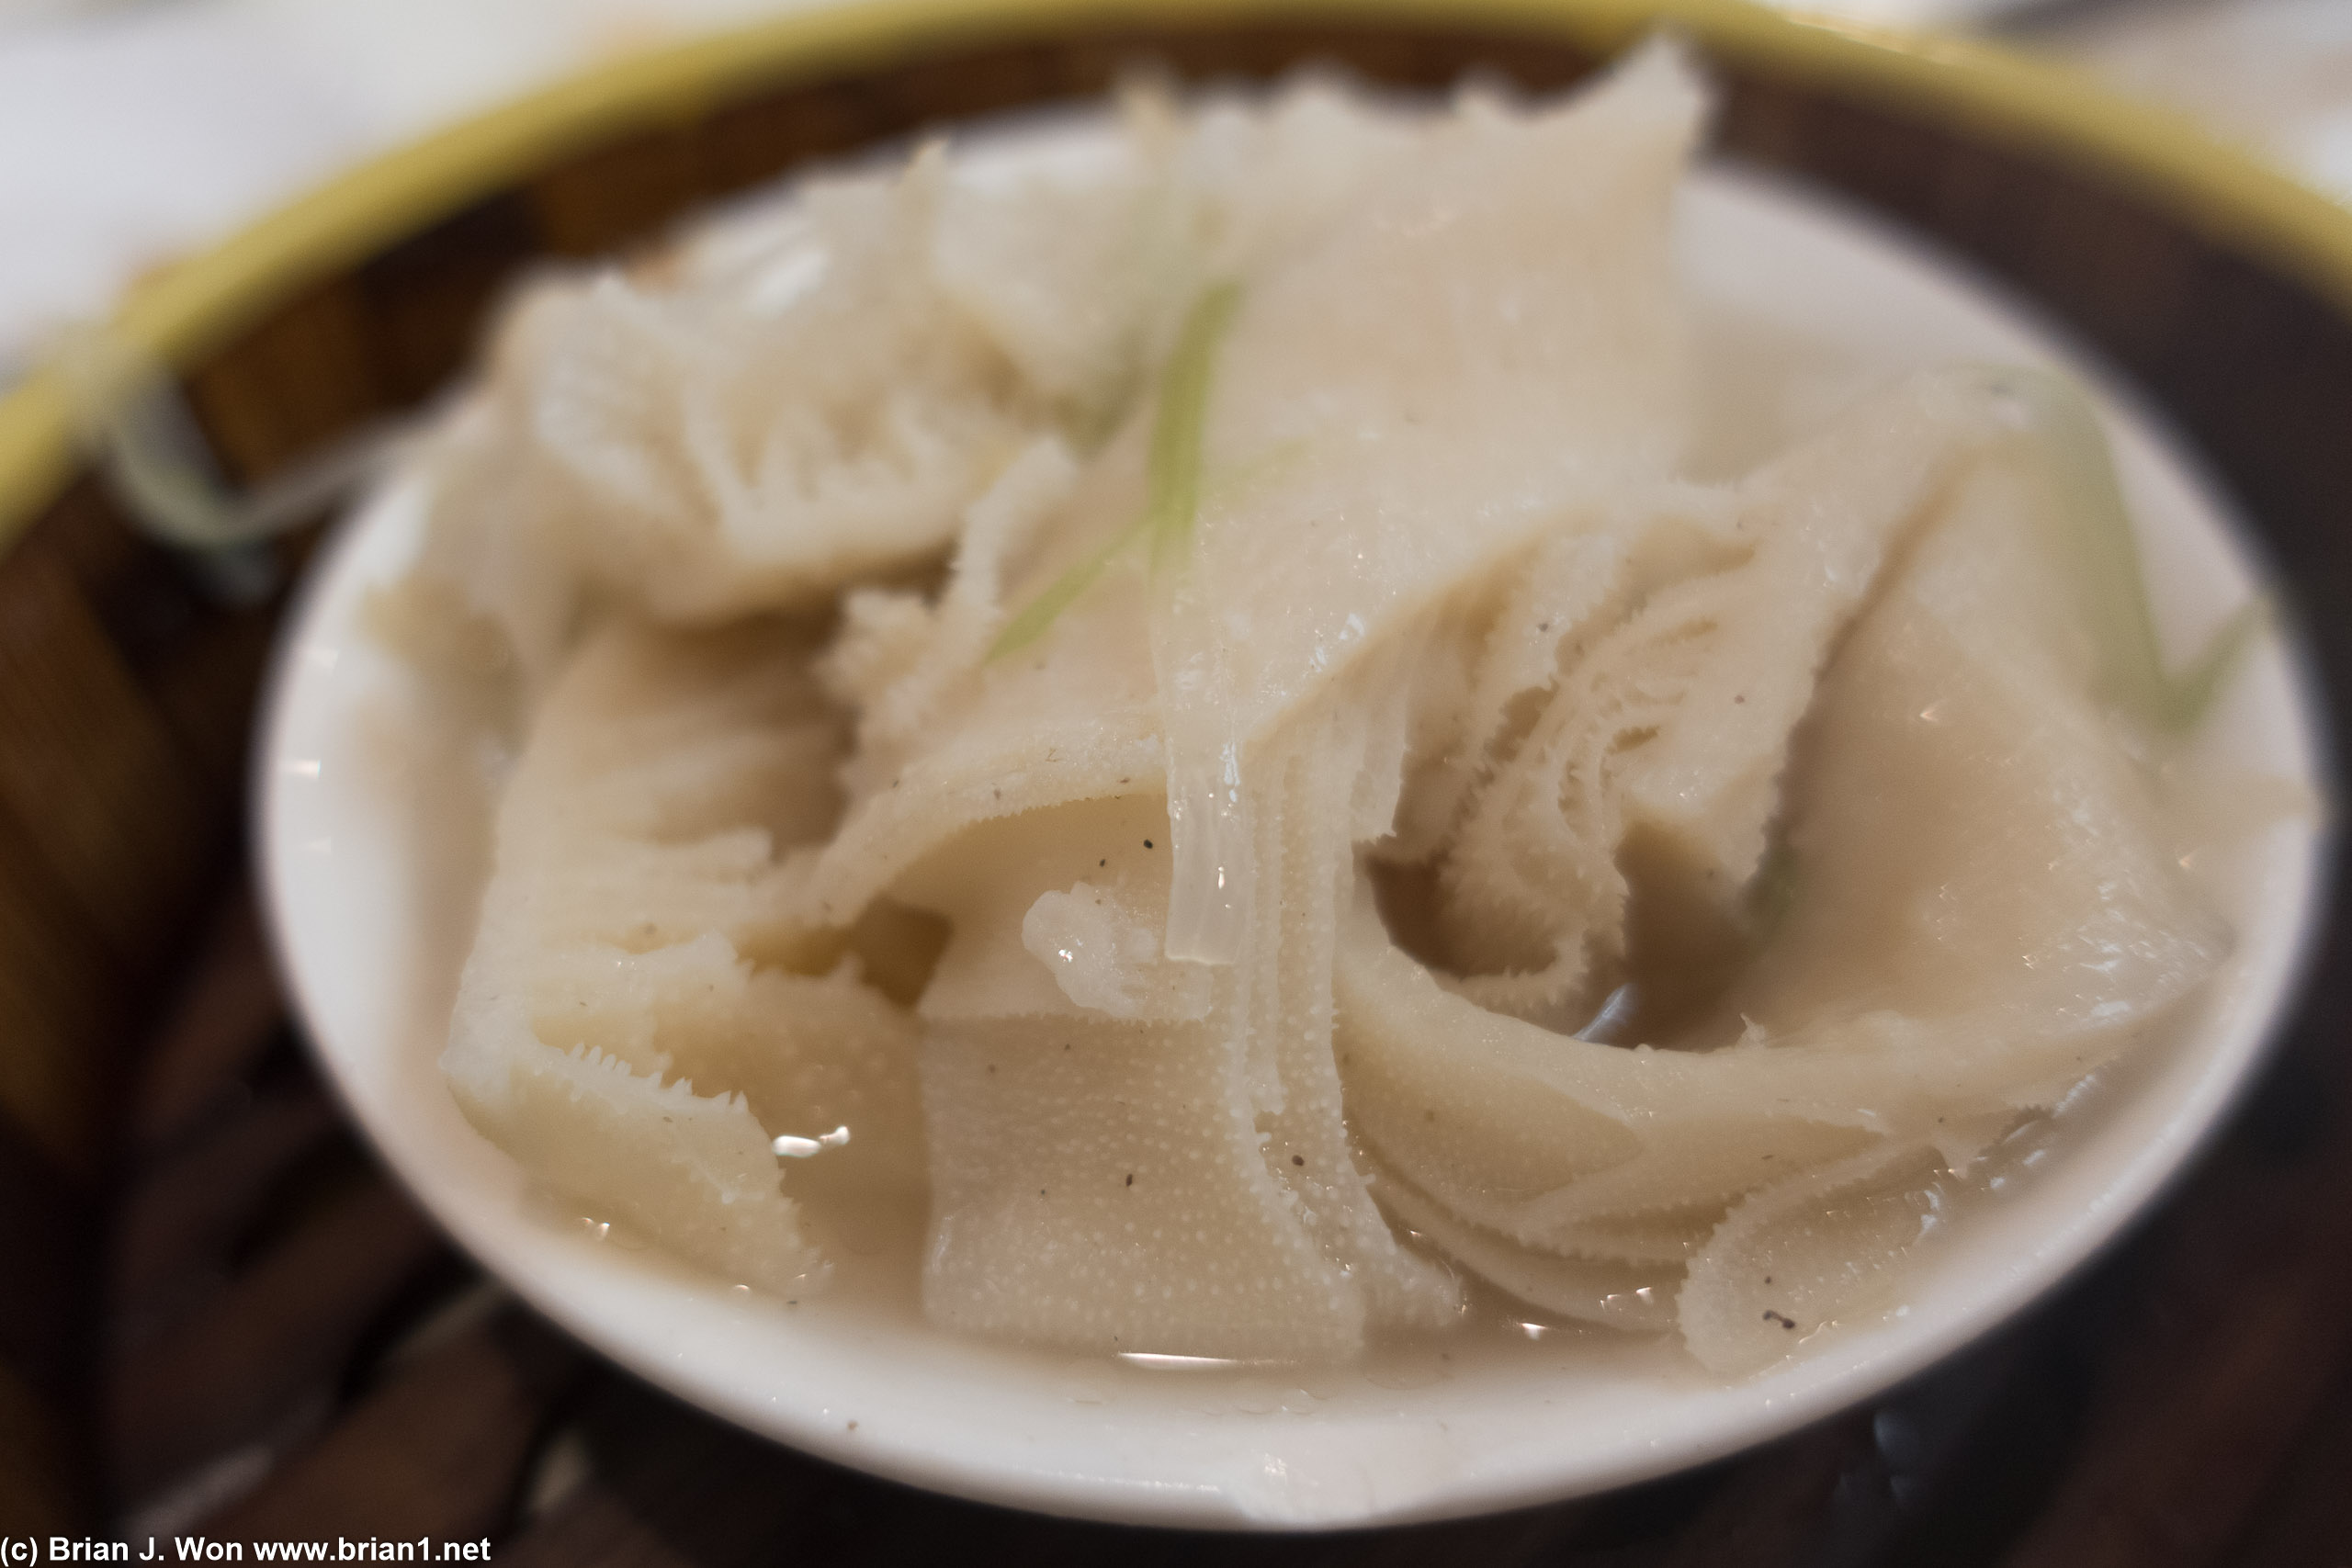 Ngau paak yip, steamed beef tripe. Perfectly cooked.